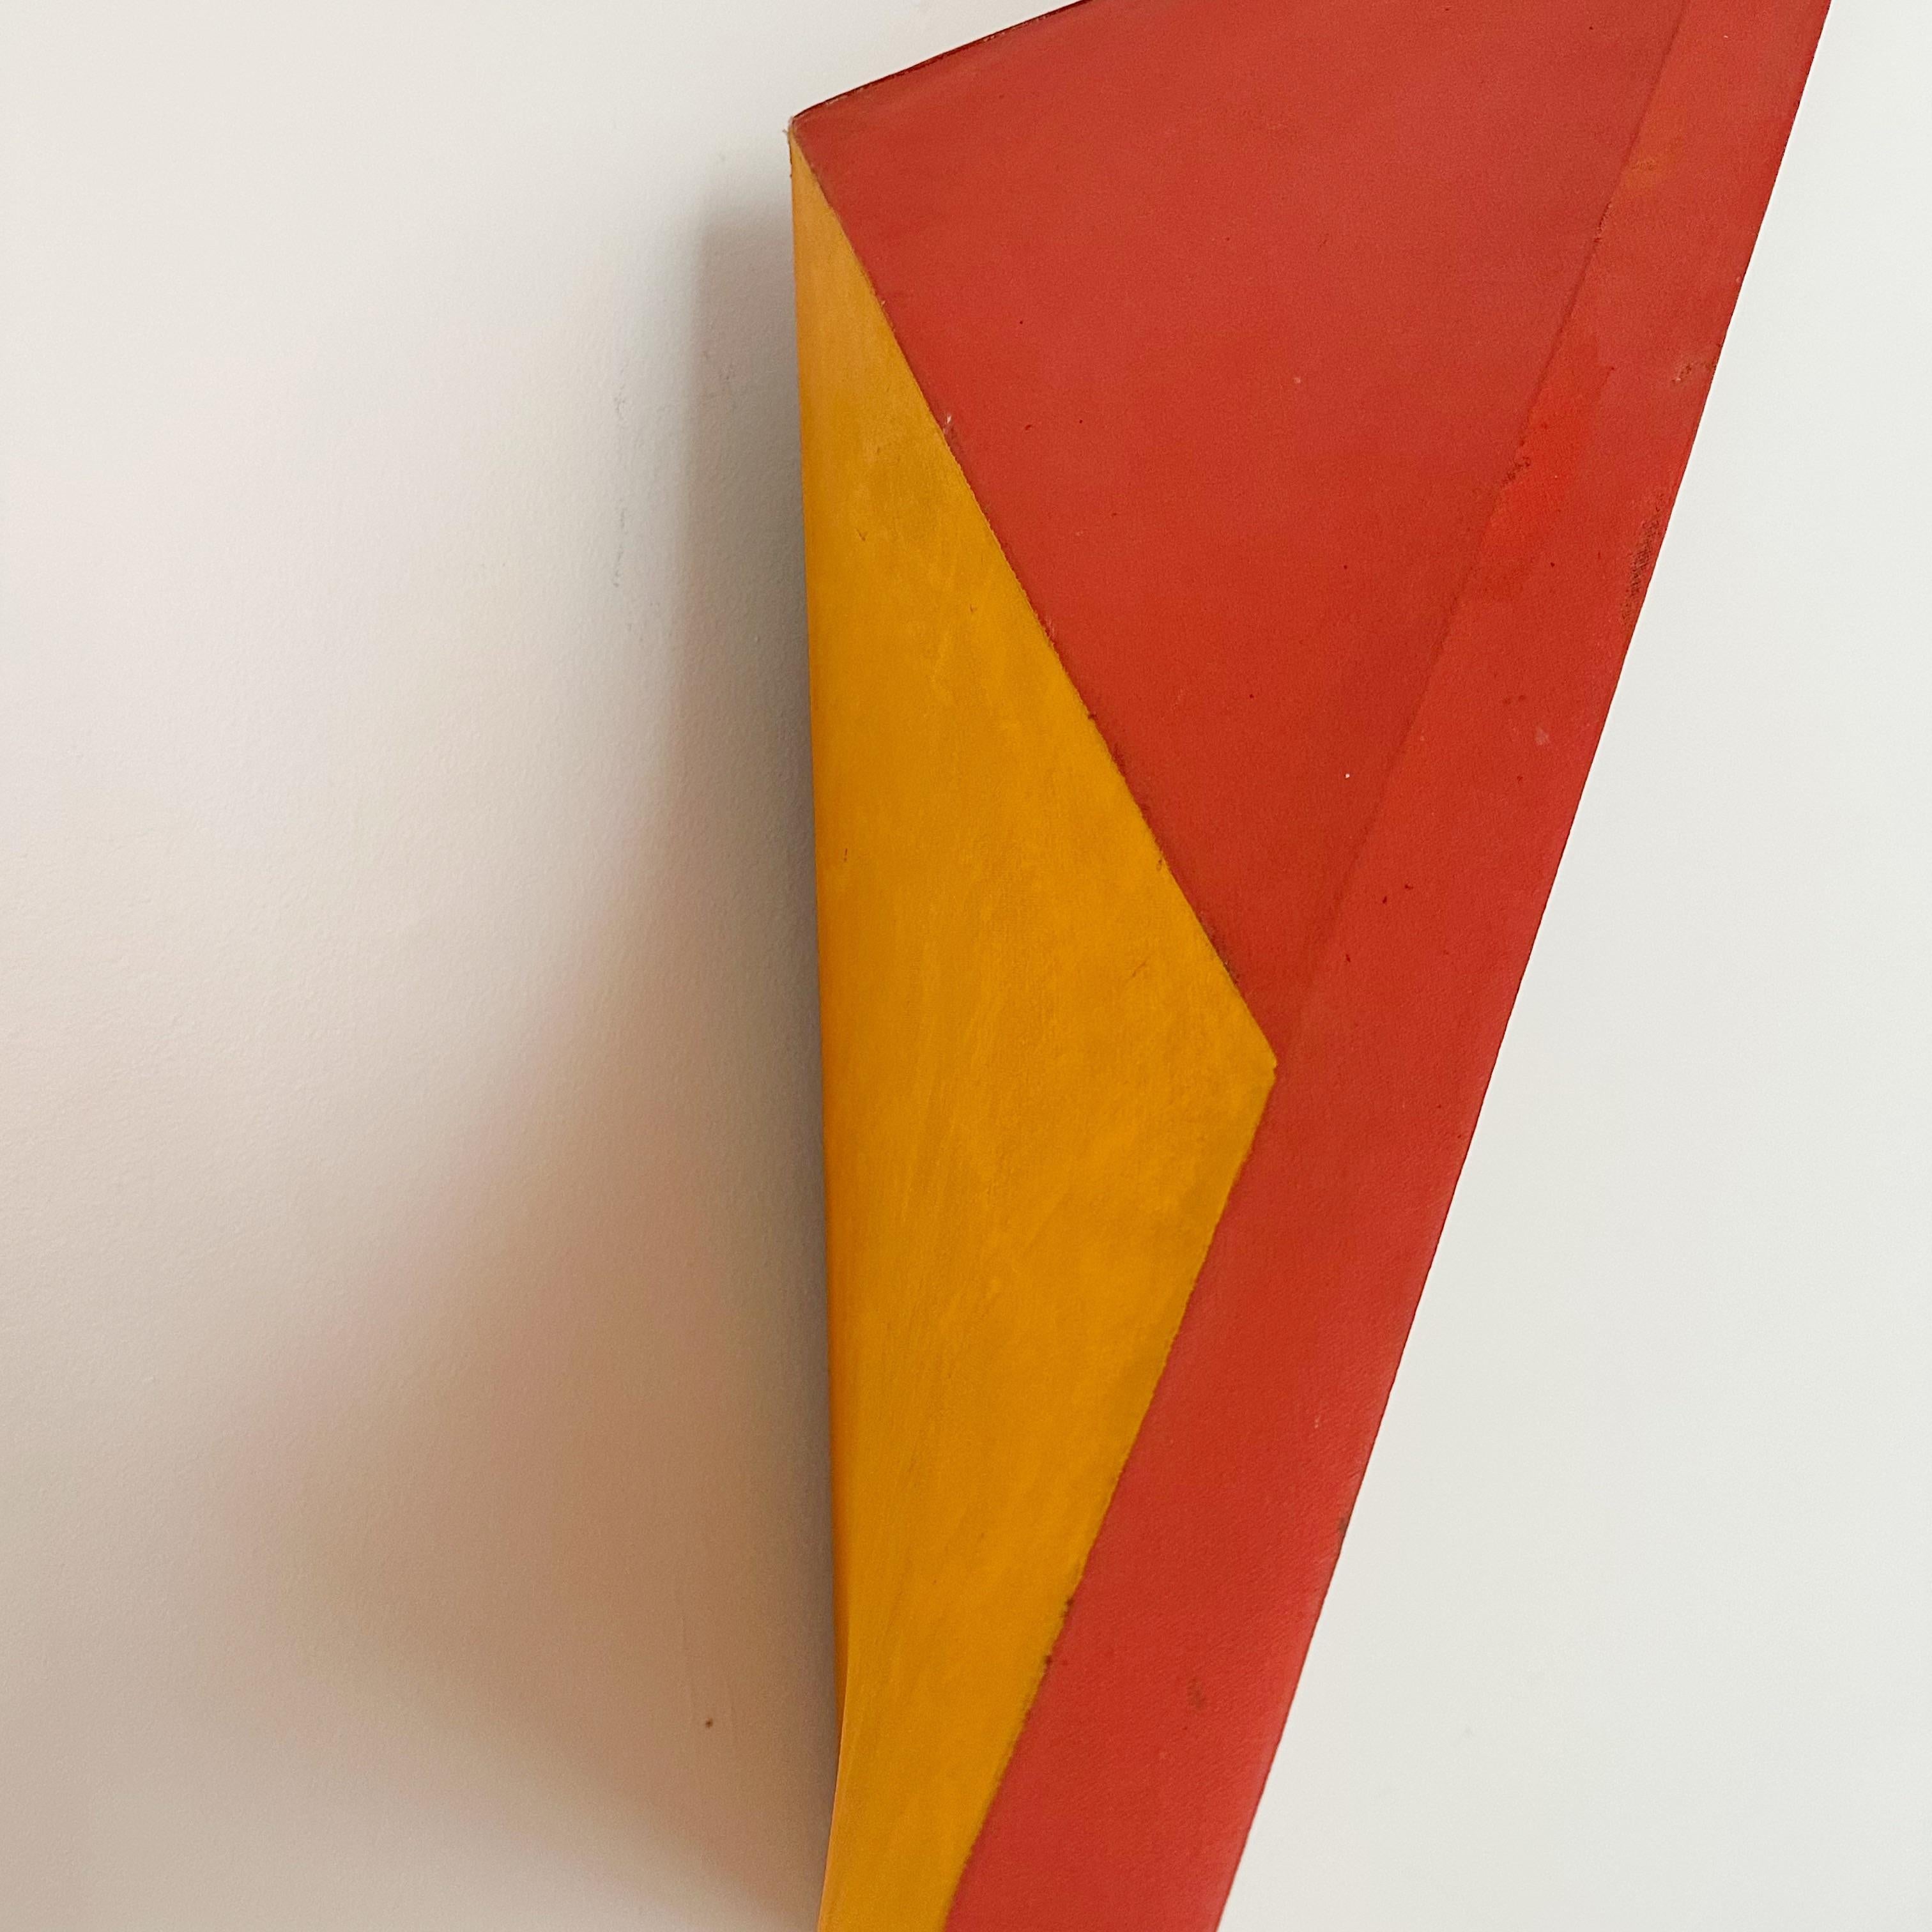 1967 Charles Hinman Red and Orange Shaped Canvas from Richard Himmel Estat In Good Condition For Sale In West Palm Beach, FL